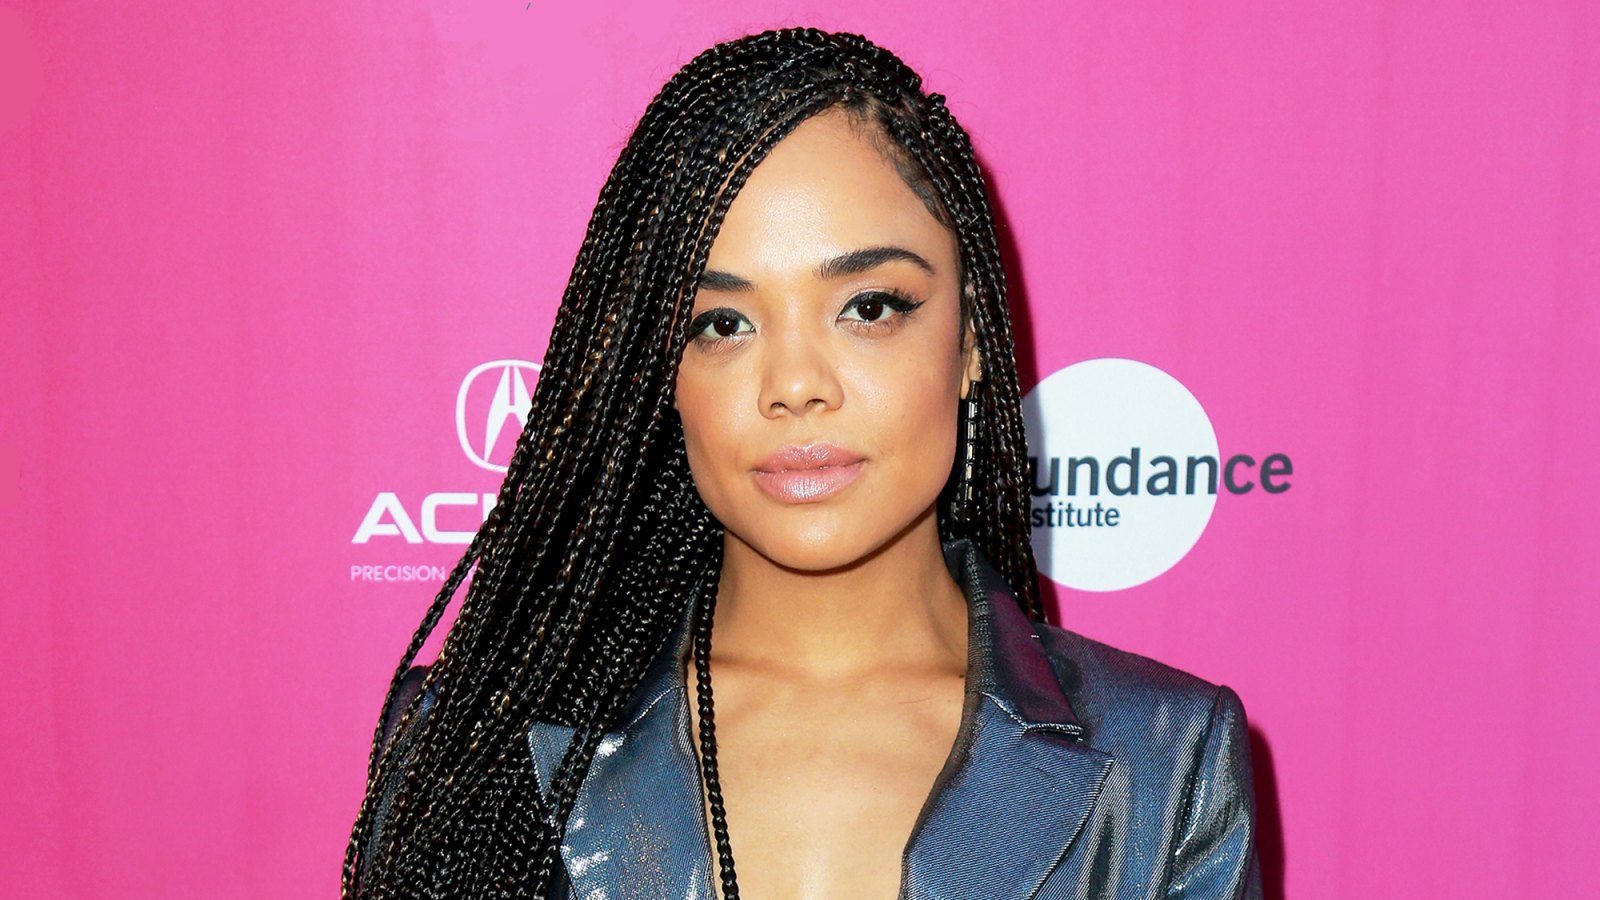 Tessa Thompson attends Sundance Institute 2018 At Sundown at The Theatre at Ace Hotel in Los Angeles, California.